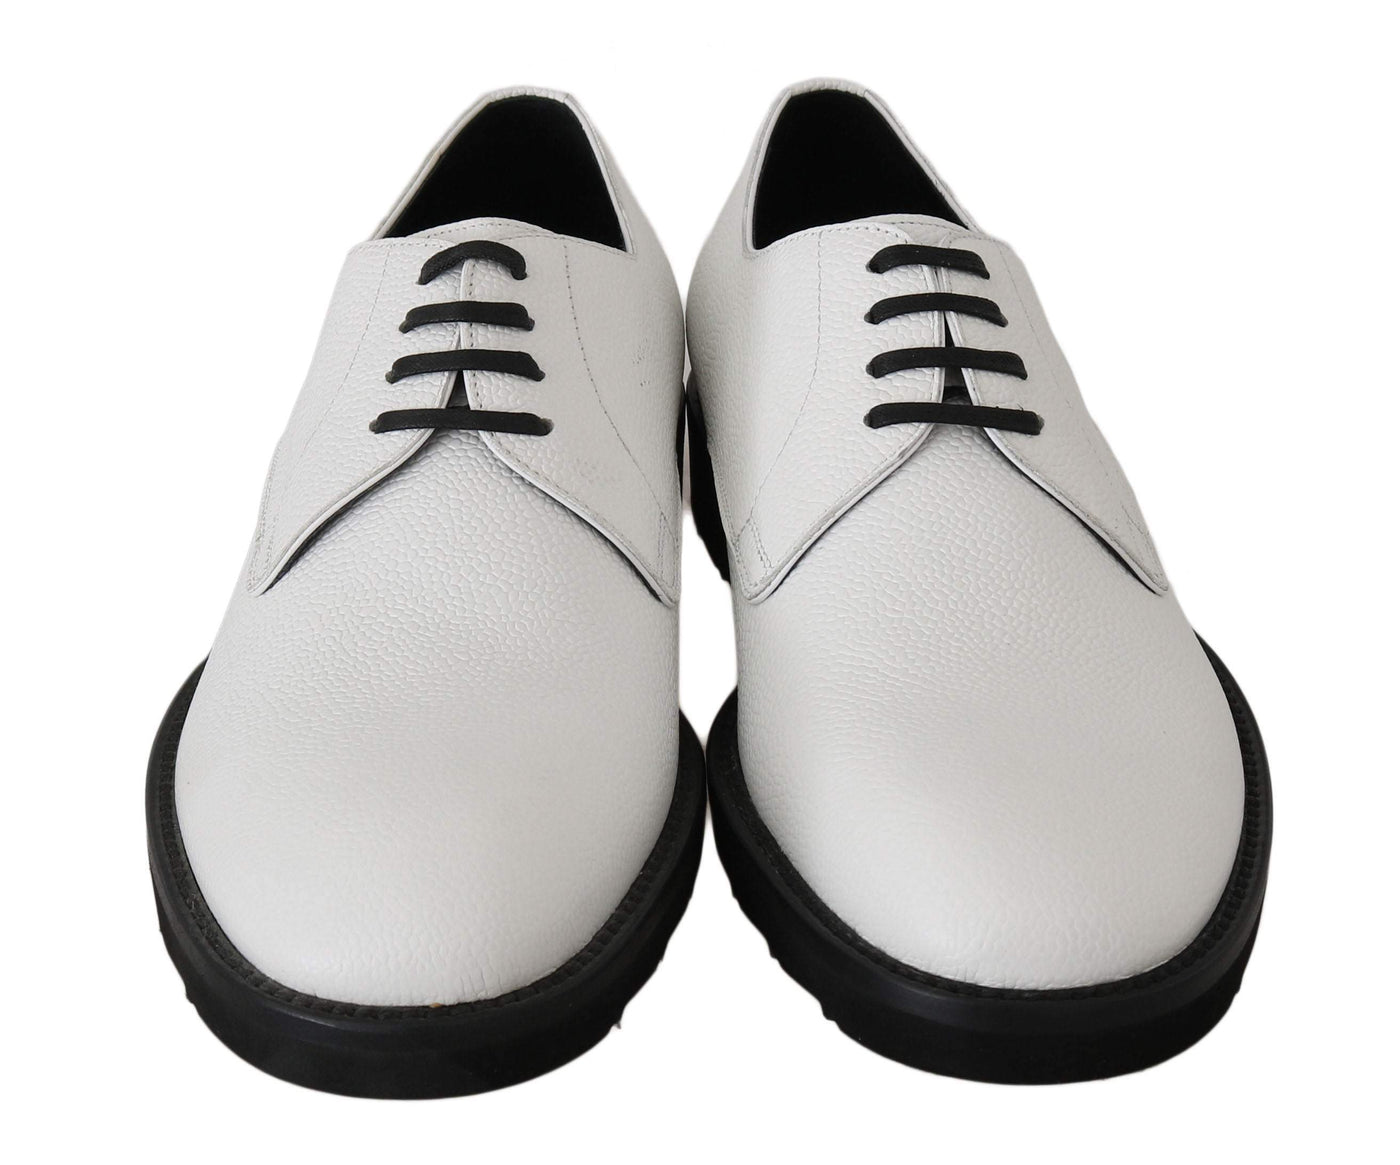 Dolce & Gabbana  White Leather Derby Dress Formal Shoes #men, Brand_Dolce & Gabbana, Catch, Category_Shoes, Dolce & Gabbana, EU39/US6, feed-agegroup-adult, feed-color-white, feed-gender-male, feed-size-US6, Formal - Men - Shoes, Gender_Men, Kogan, Shoes - New Arrivals, White at SEYMAYKA